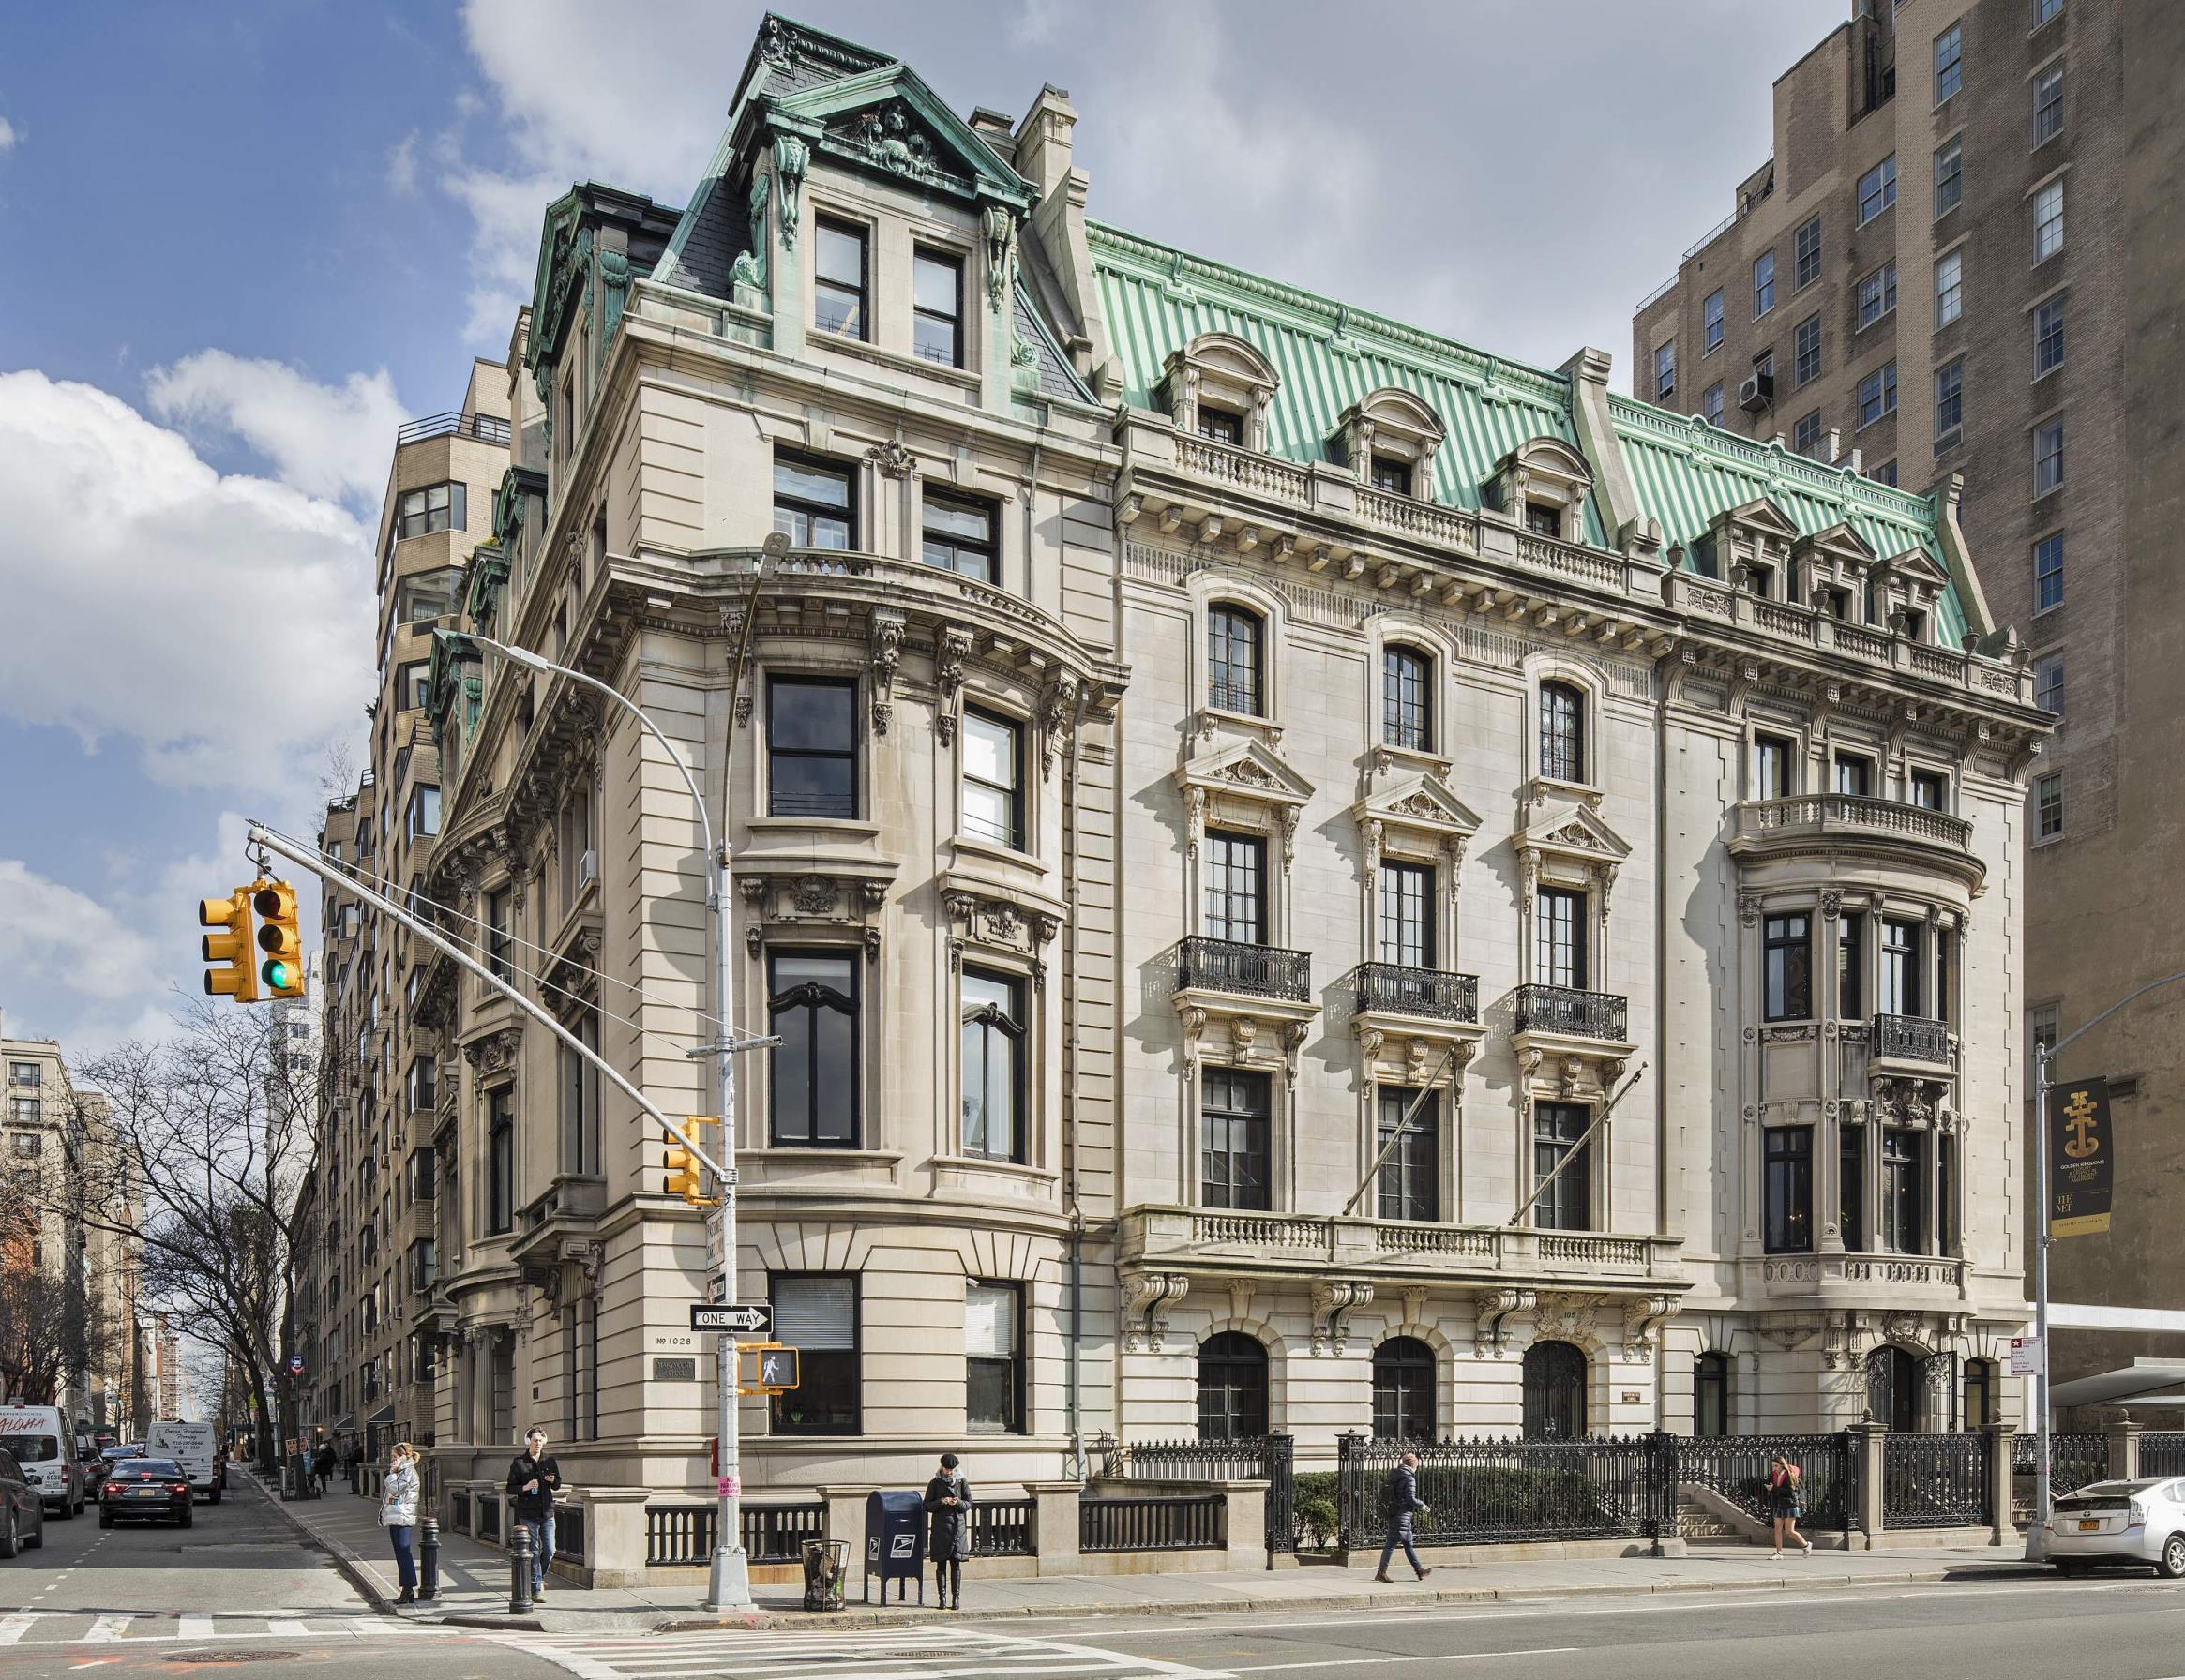 Photo of Marymount building on 5th avenue